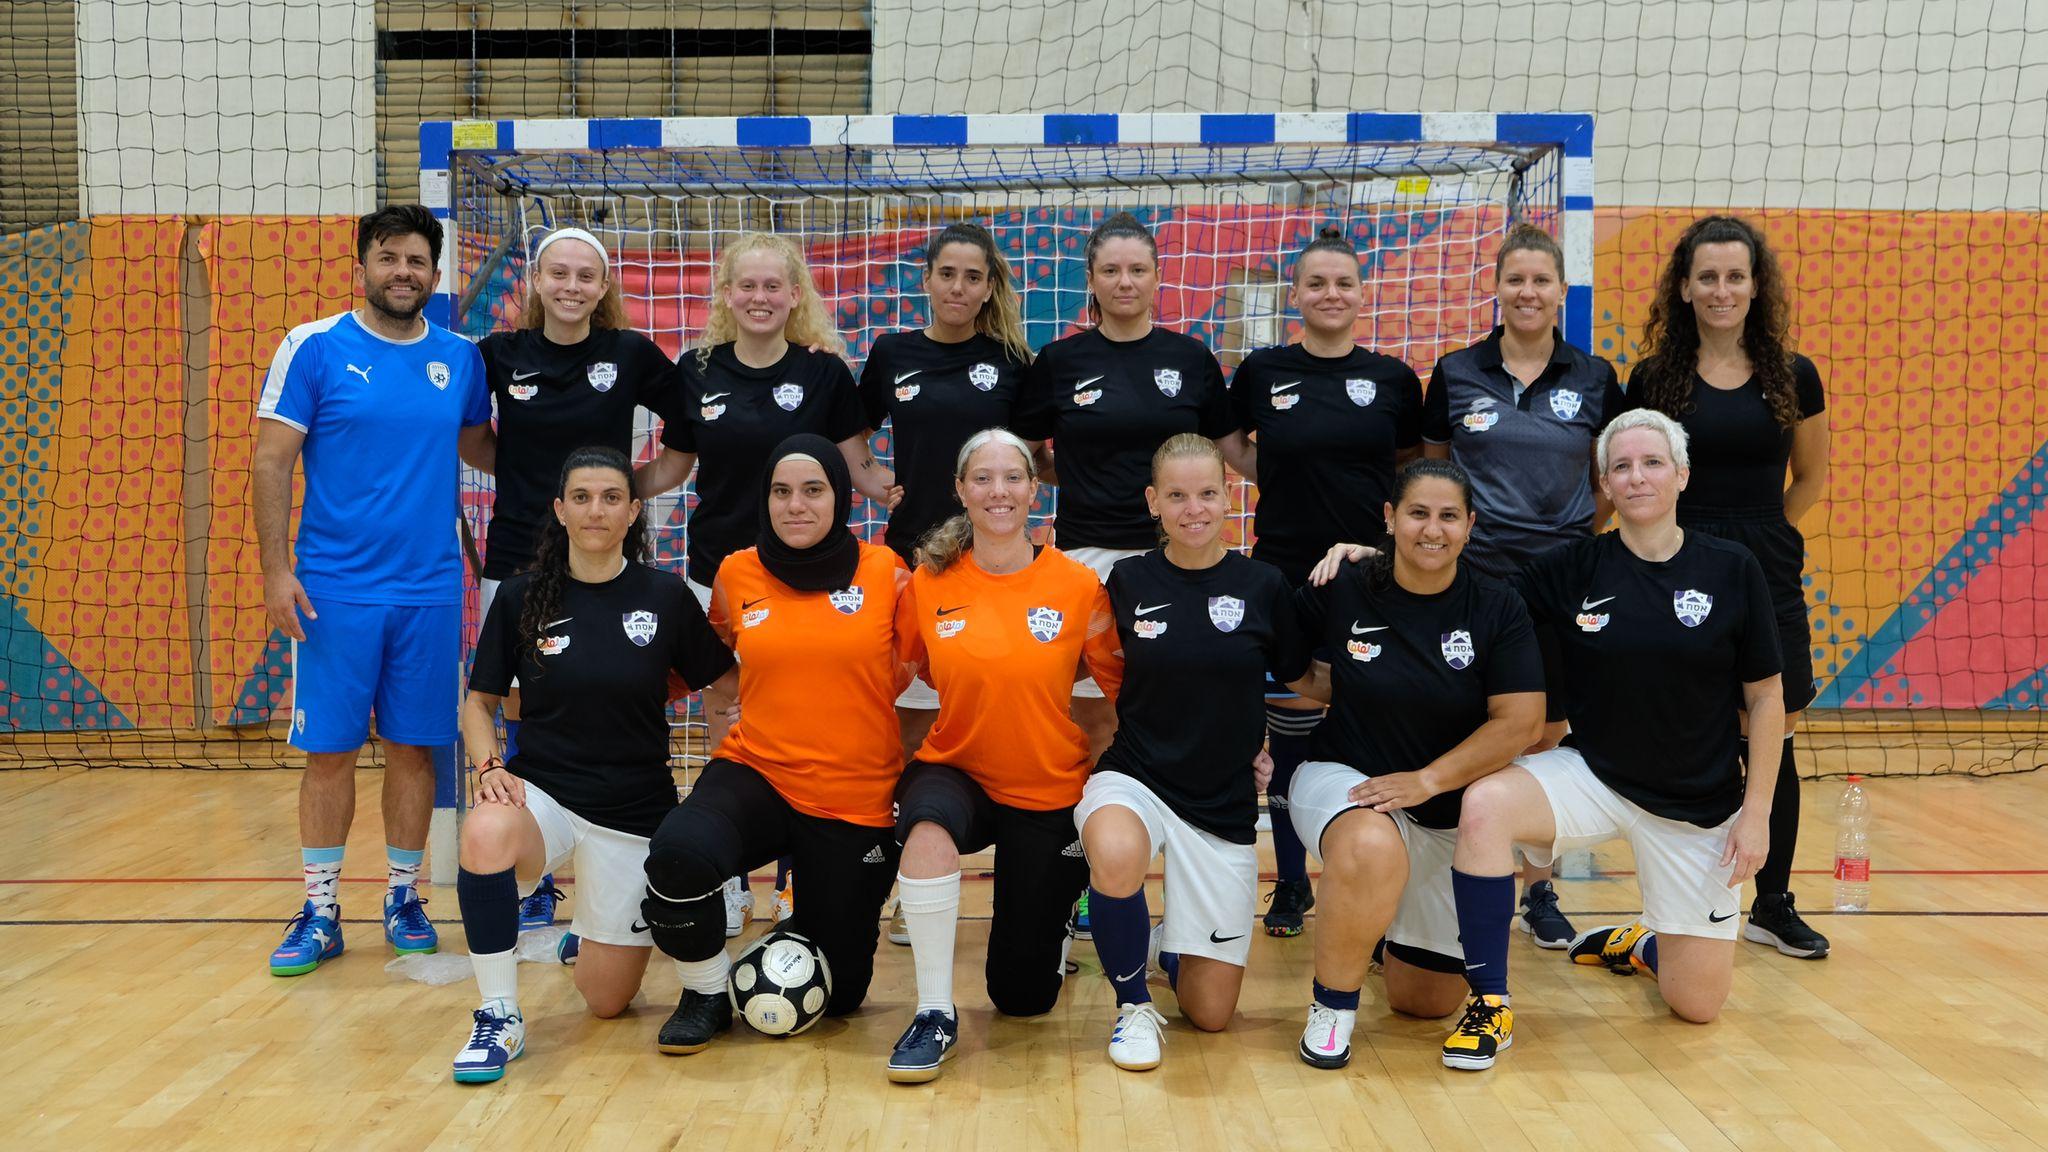 Team photo of the Israel Women’s National Futsal team with players and coaches standing in front of a futsal goal.